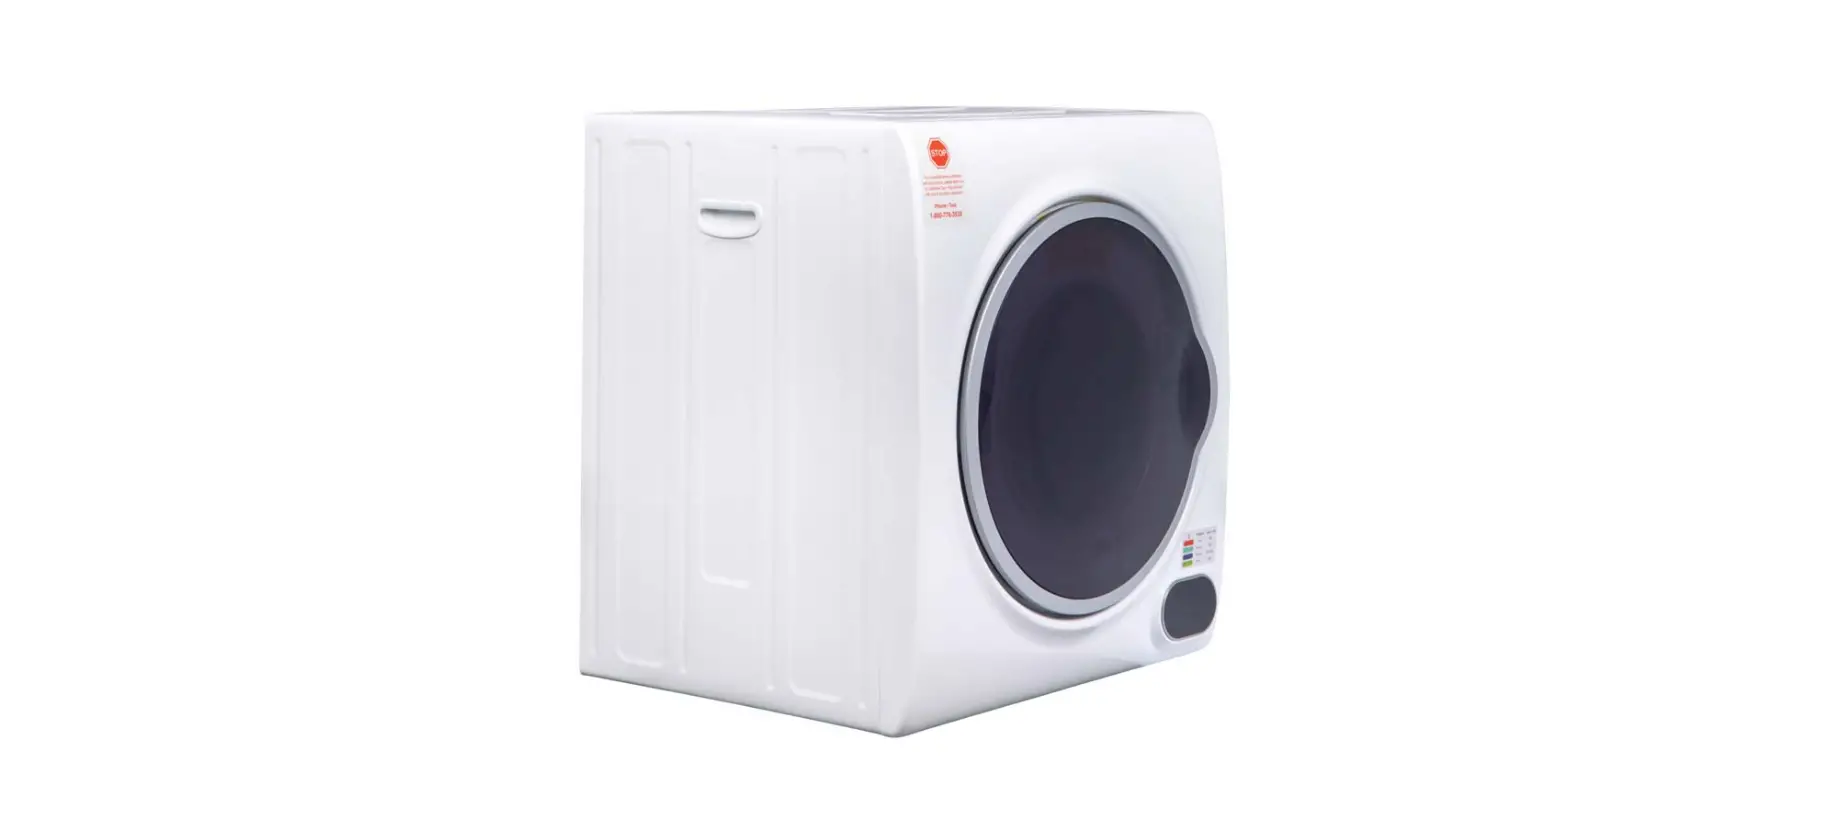 848 Ultra Compact Dryer